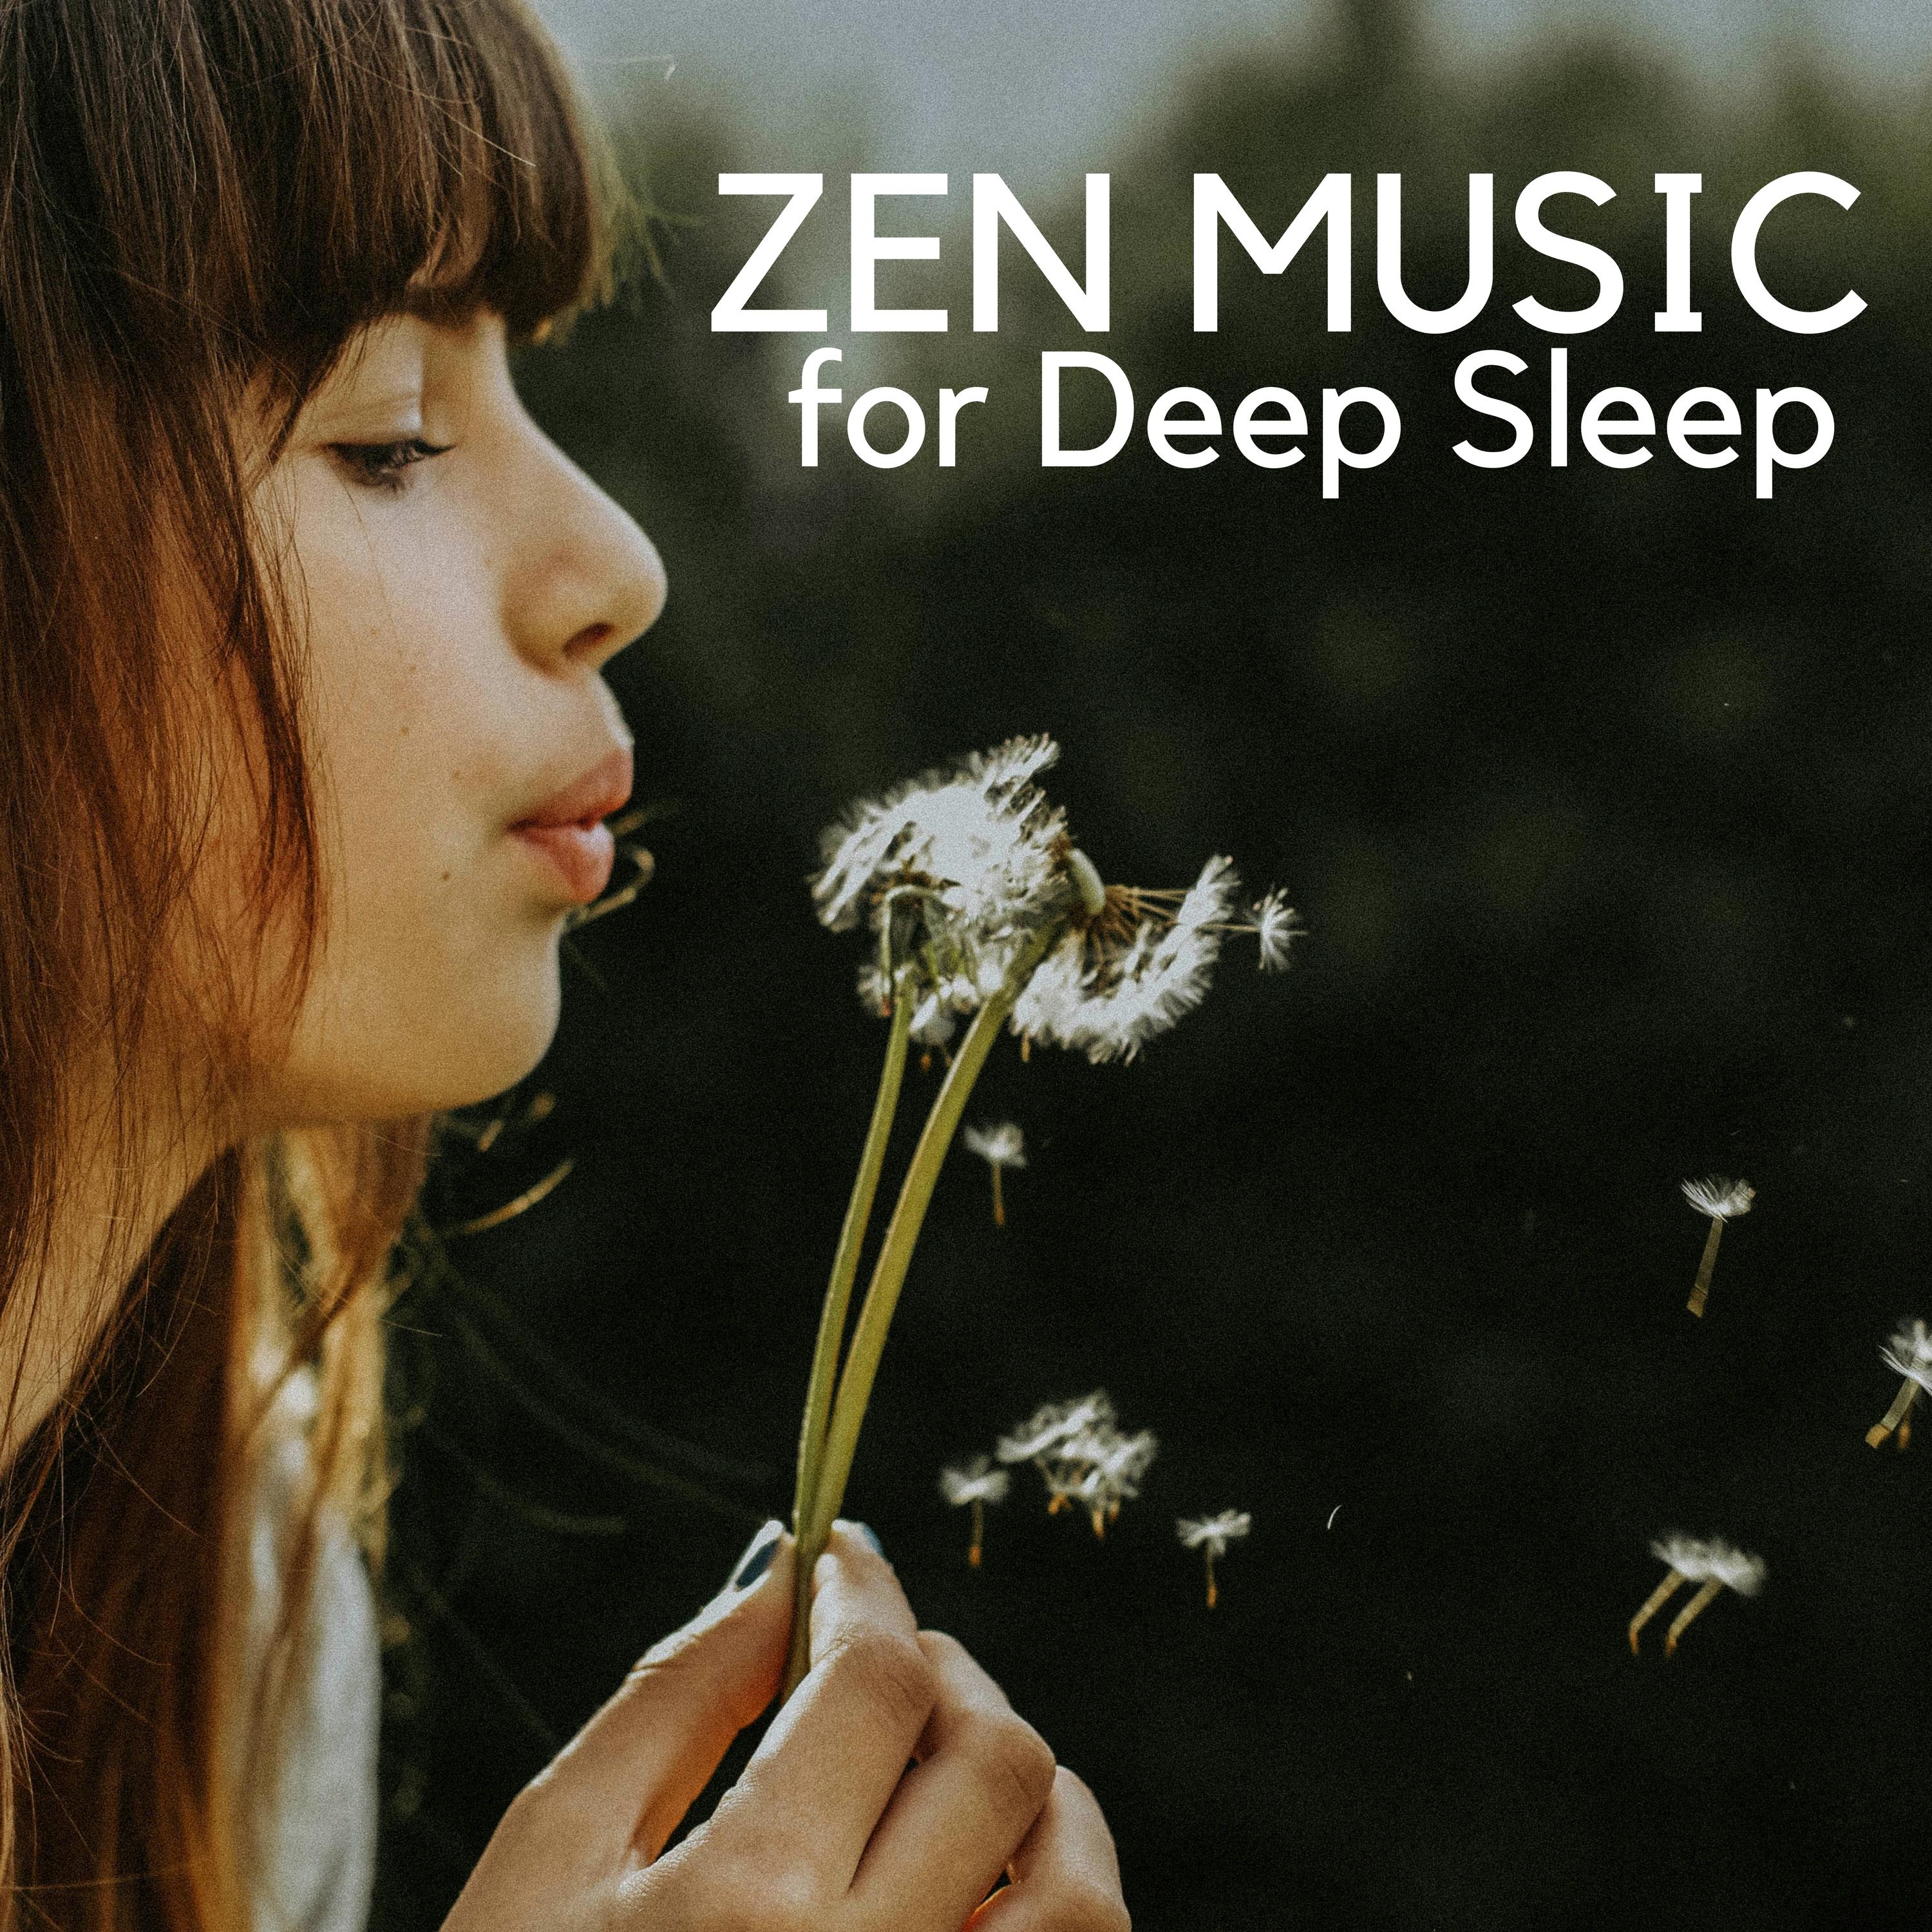 Zen Music for Deep Sleep and Prime Relaxation